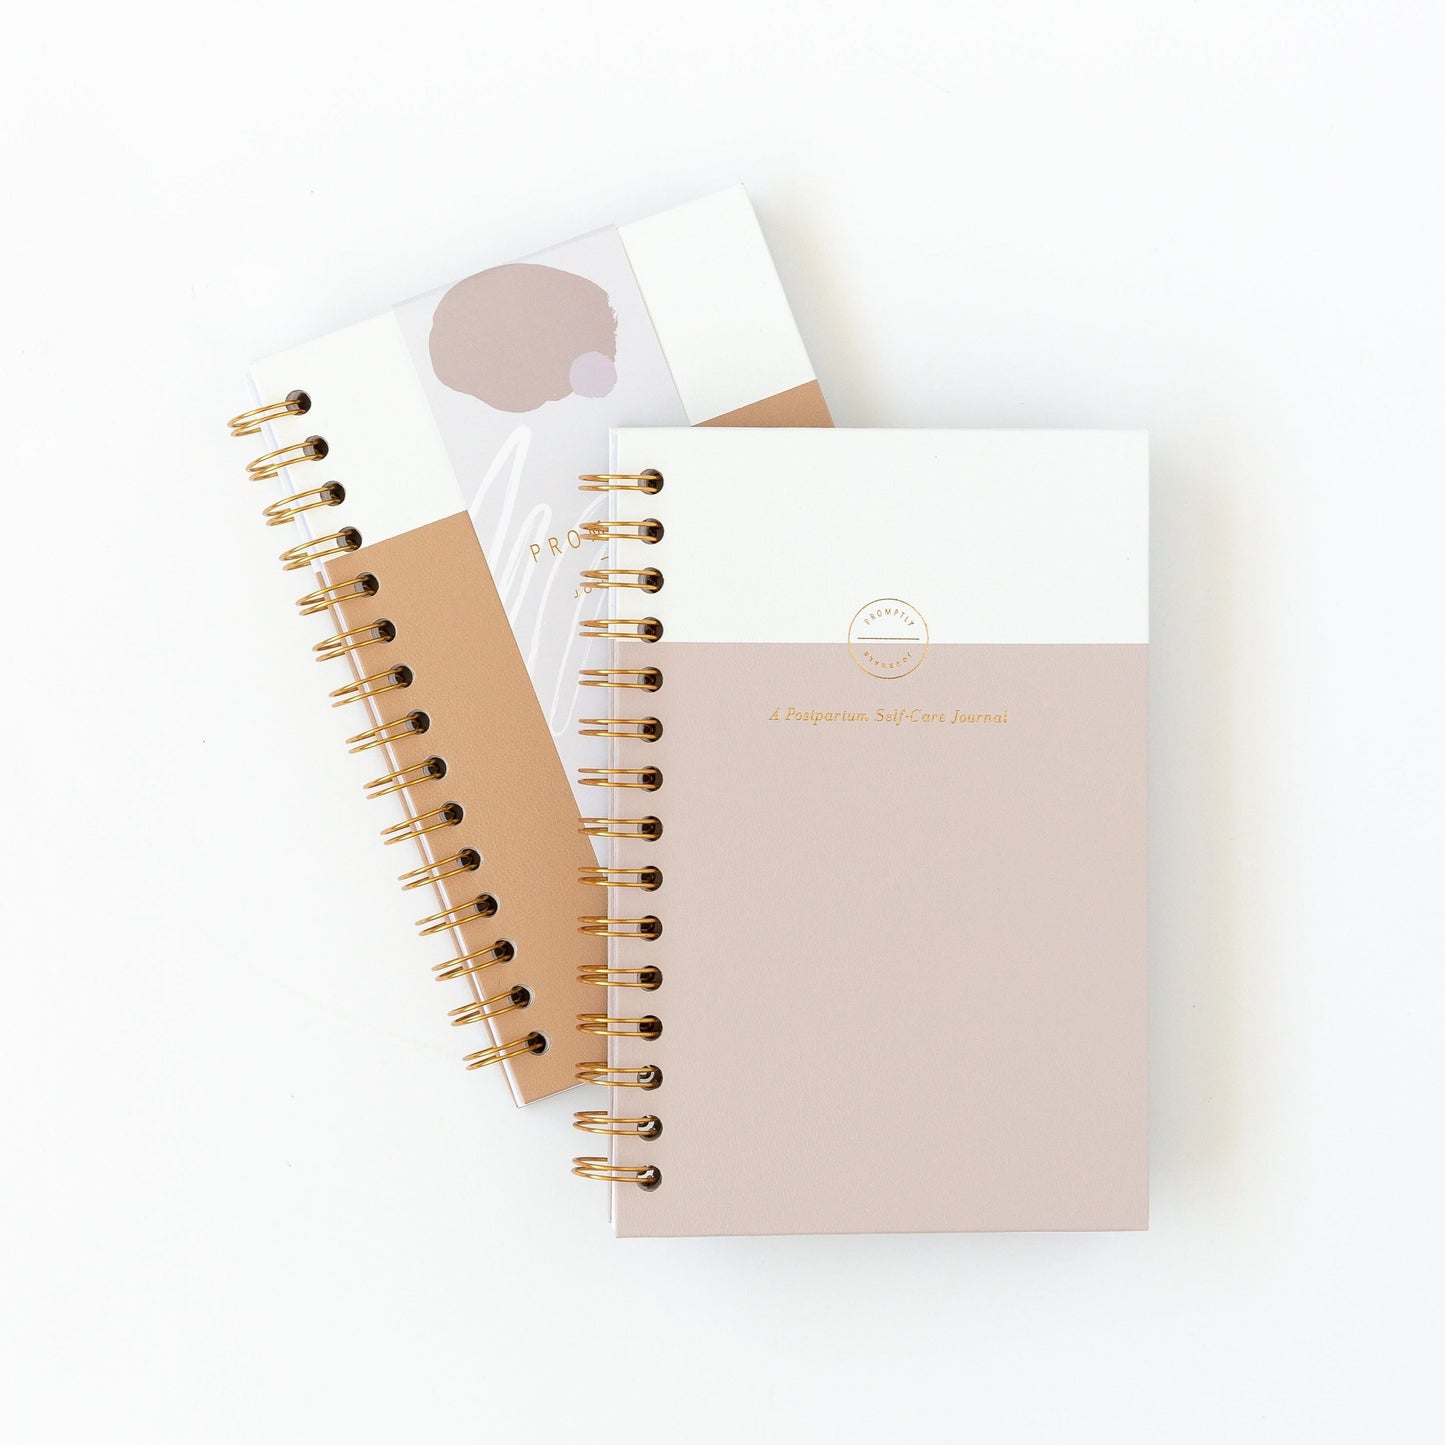 My Postpartum Journal: A Year of Self-Care (Powdered Lilac) by Promptly Journals